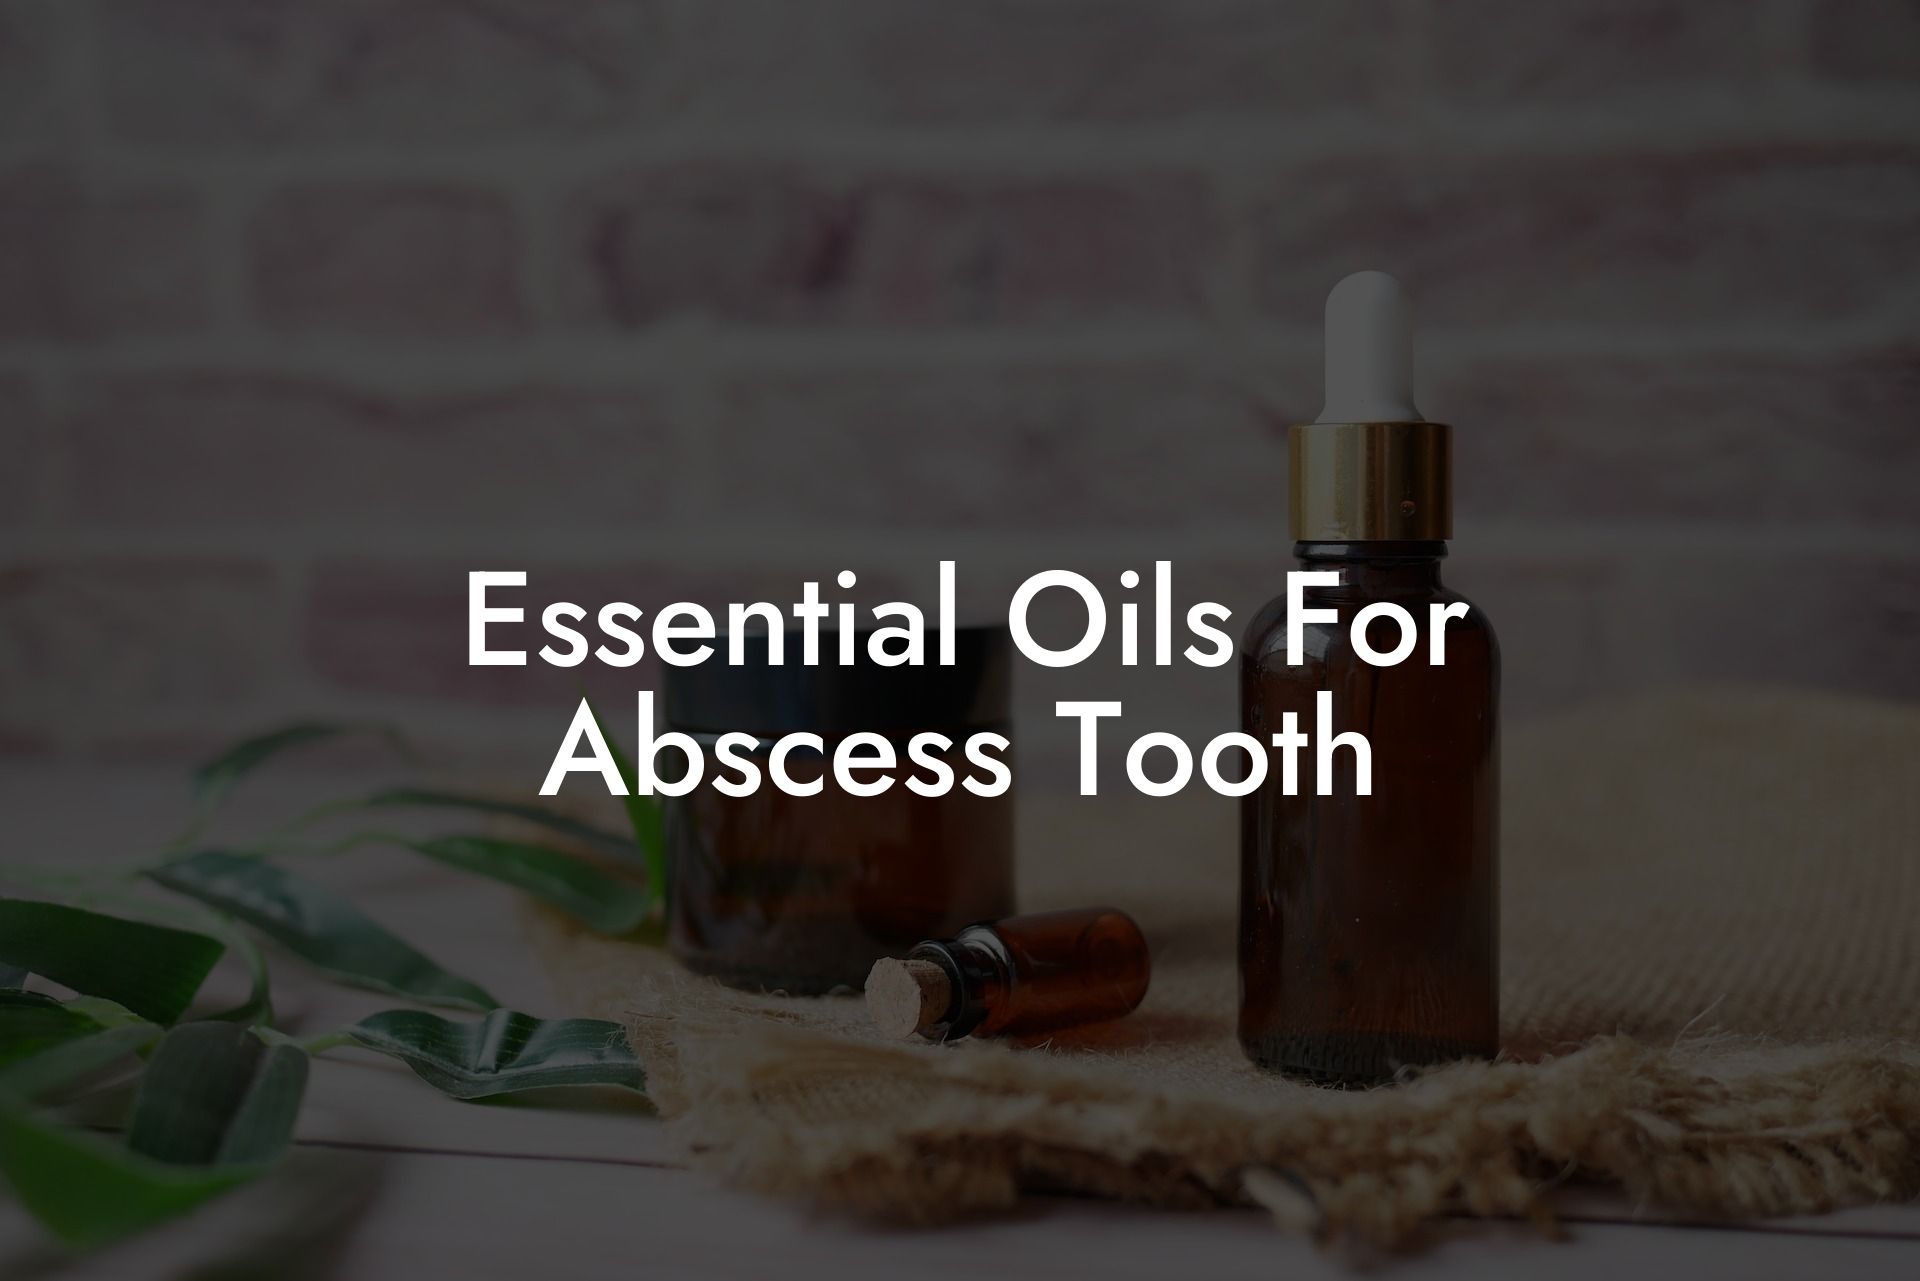 Essential Oils For Abscess Tooth